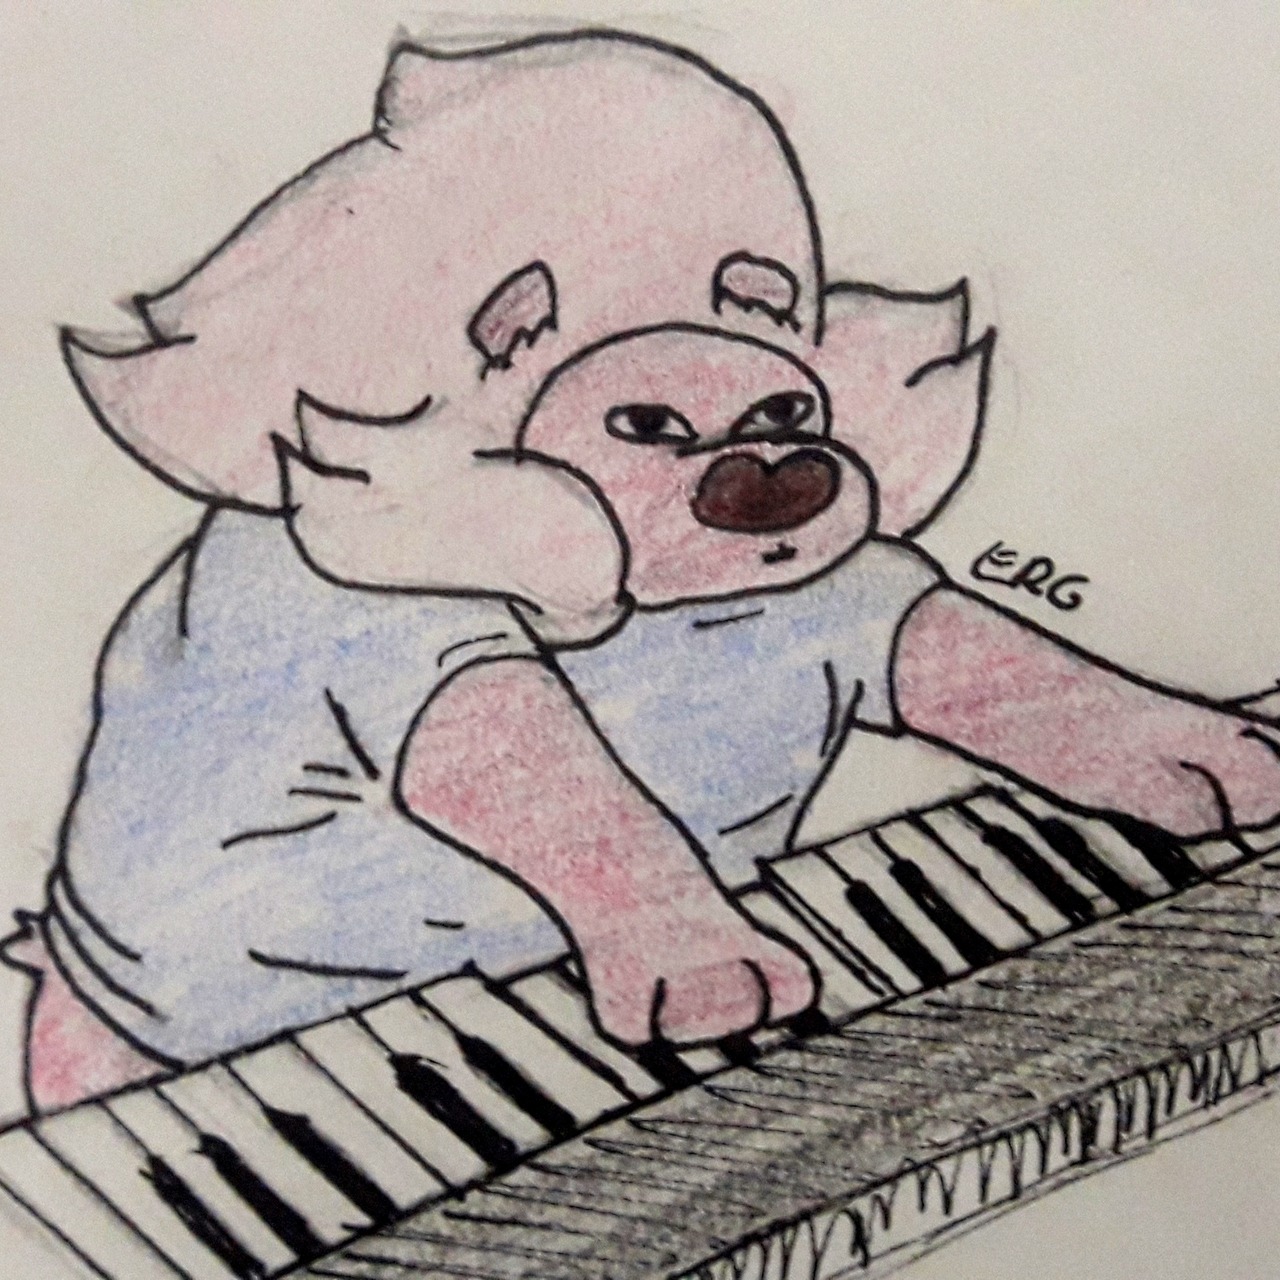 30 days of Steven challenge 2nd day - Something pink I went for Lion, parody of the piano cat x) (probably someone else has done this tho) @sarahelisabethart